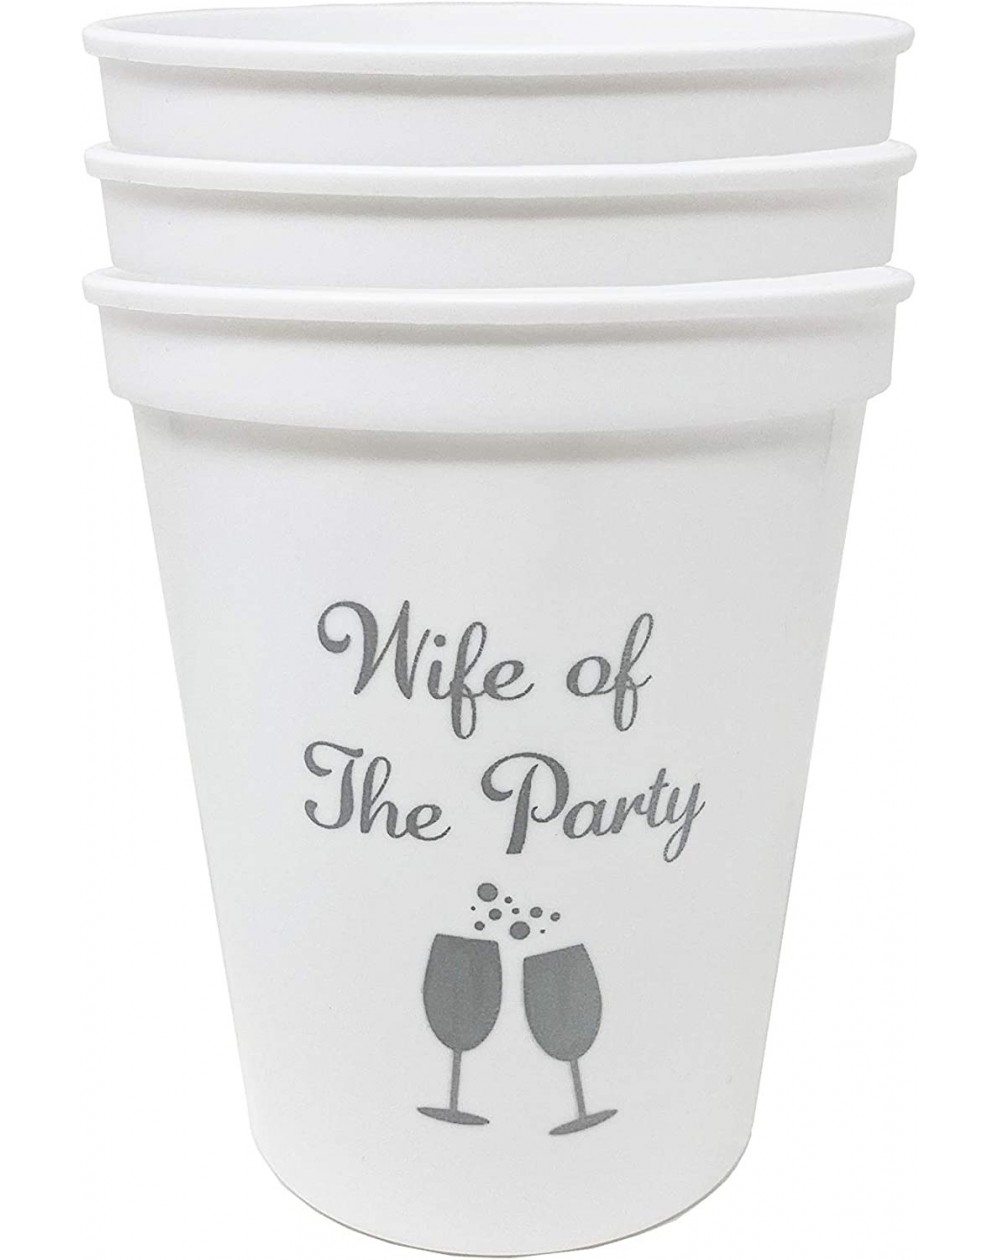 Tableware Bridal Bachelorette Party Cups - 3 Wife of The Party (White) - 3 Wife of the Party Cups - CZ19E236DH8 $12.08